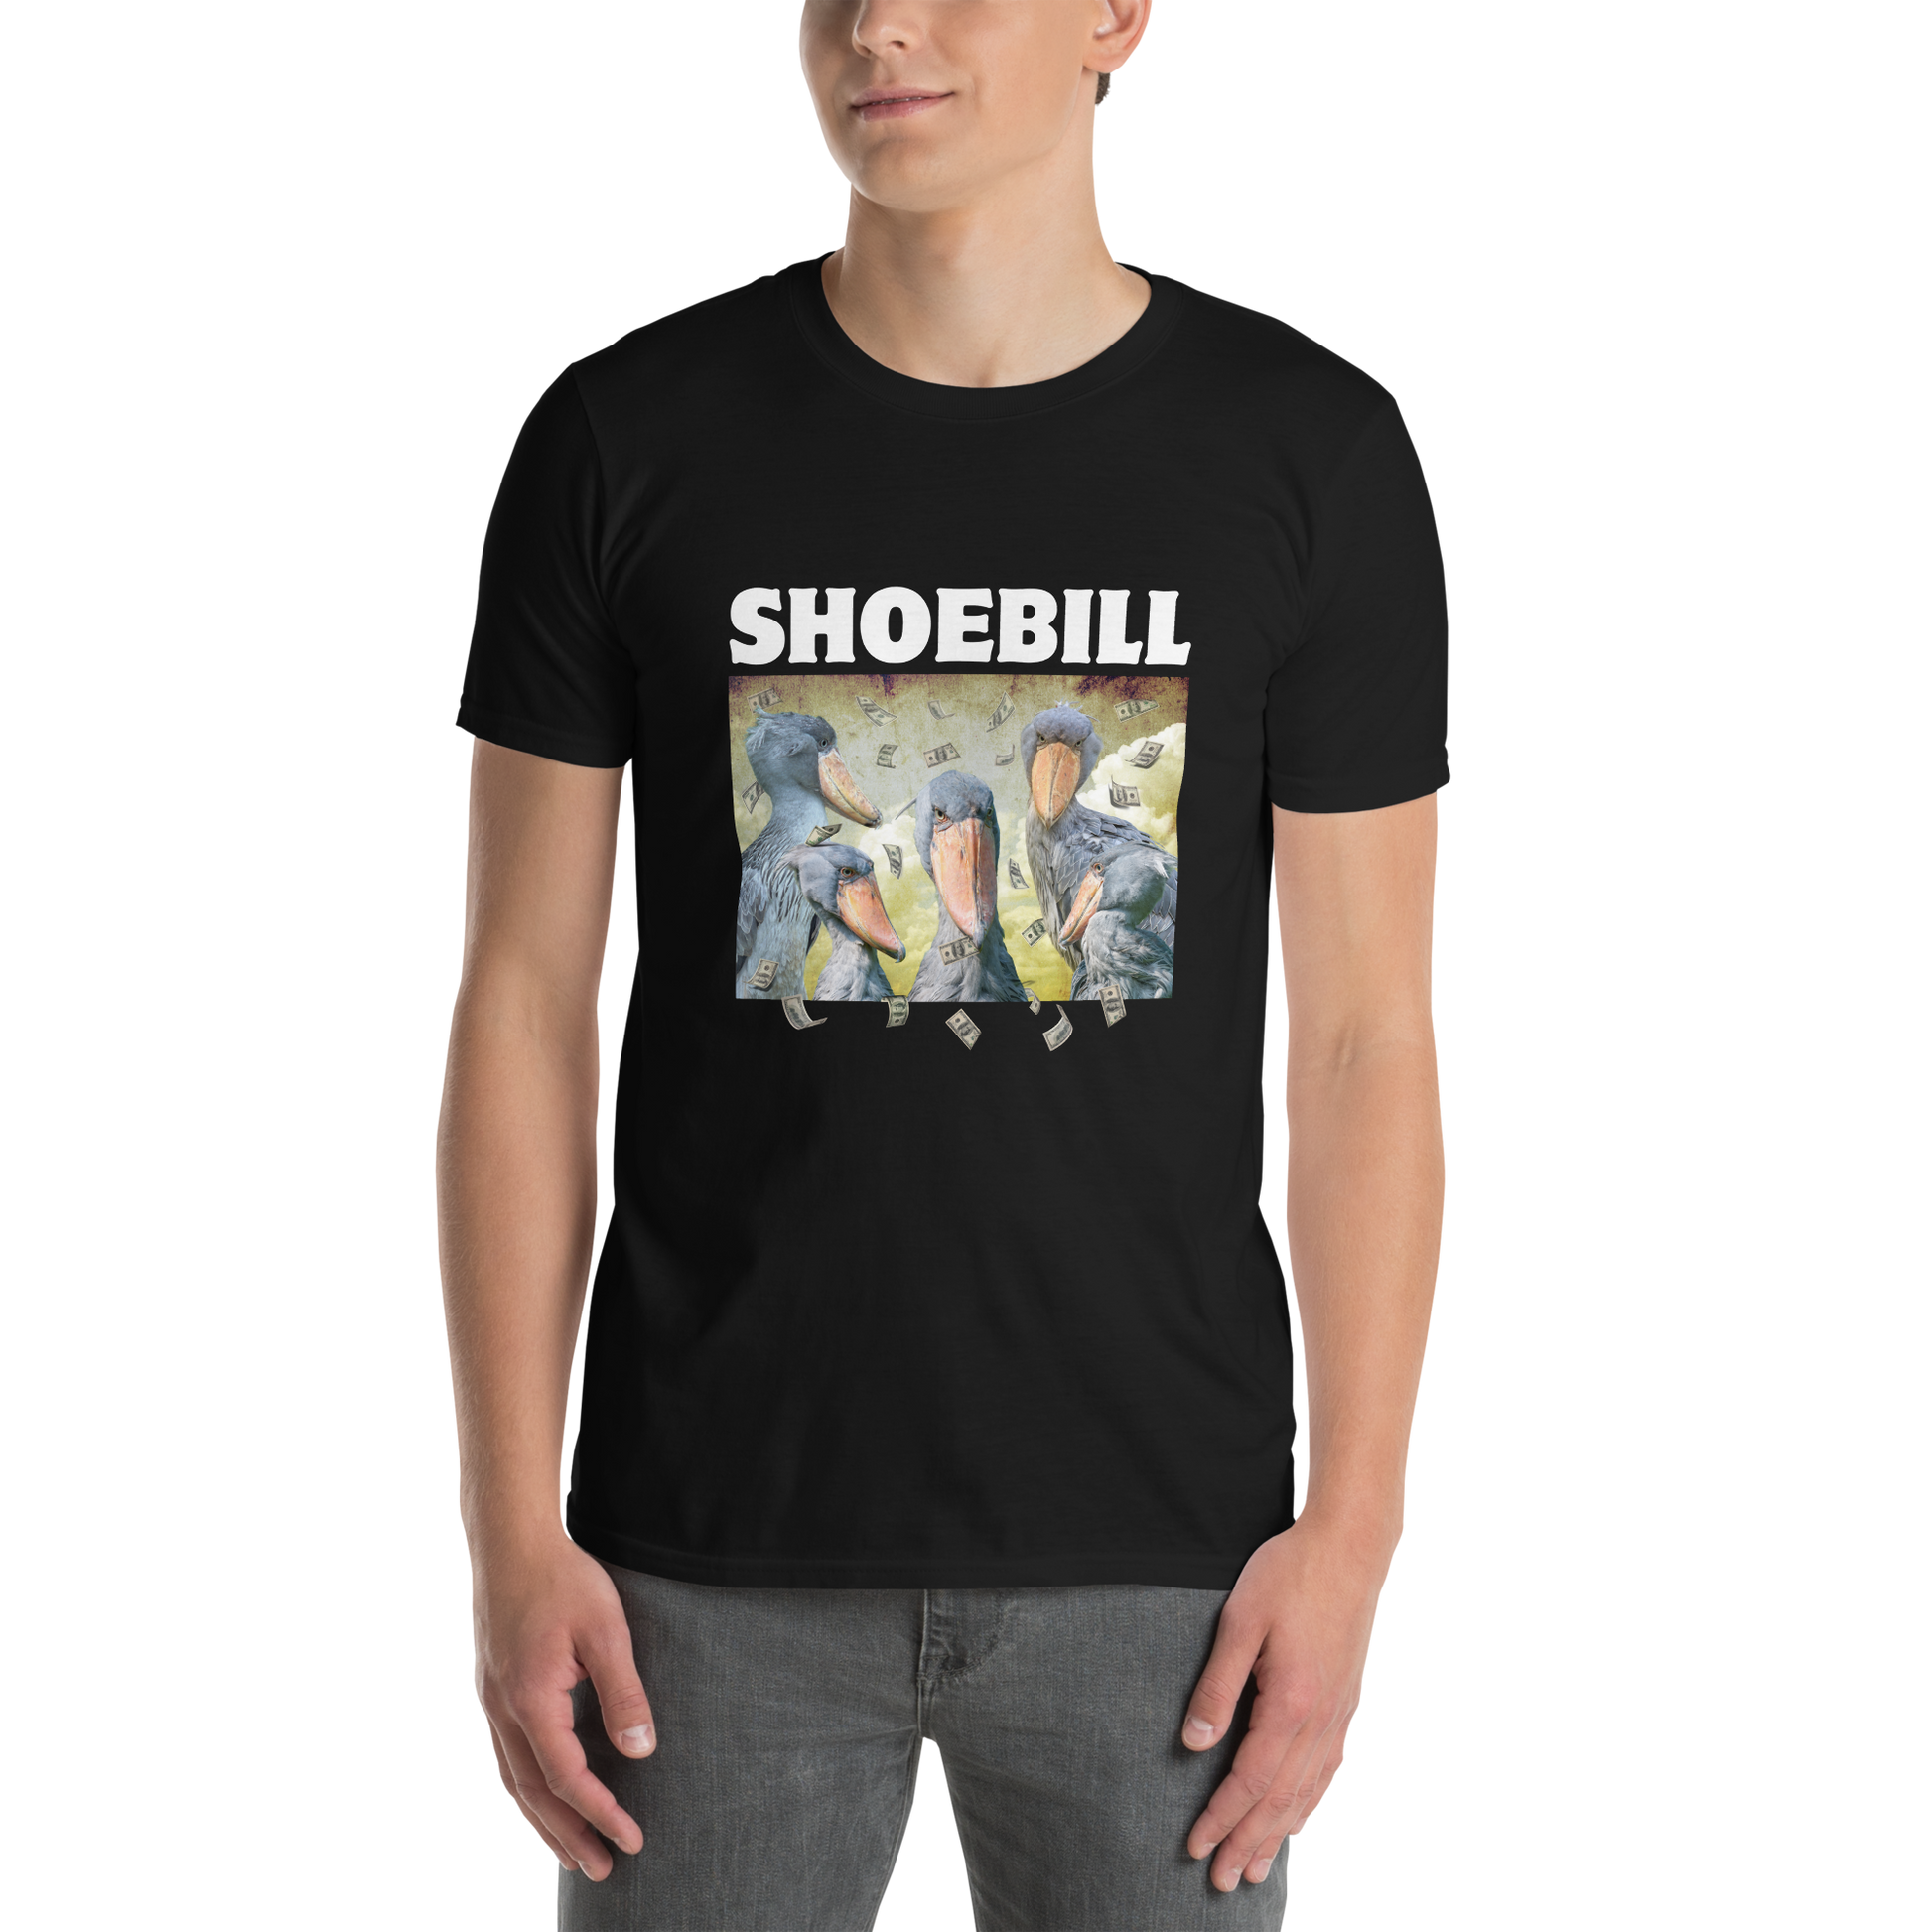 Man wearing a Black Shoebill T-Shirt featuring a cool Shoebill graphic on the chest - Artsy/Funny Graphic Shoebill Stork T-Shirts - Boozy Fox